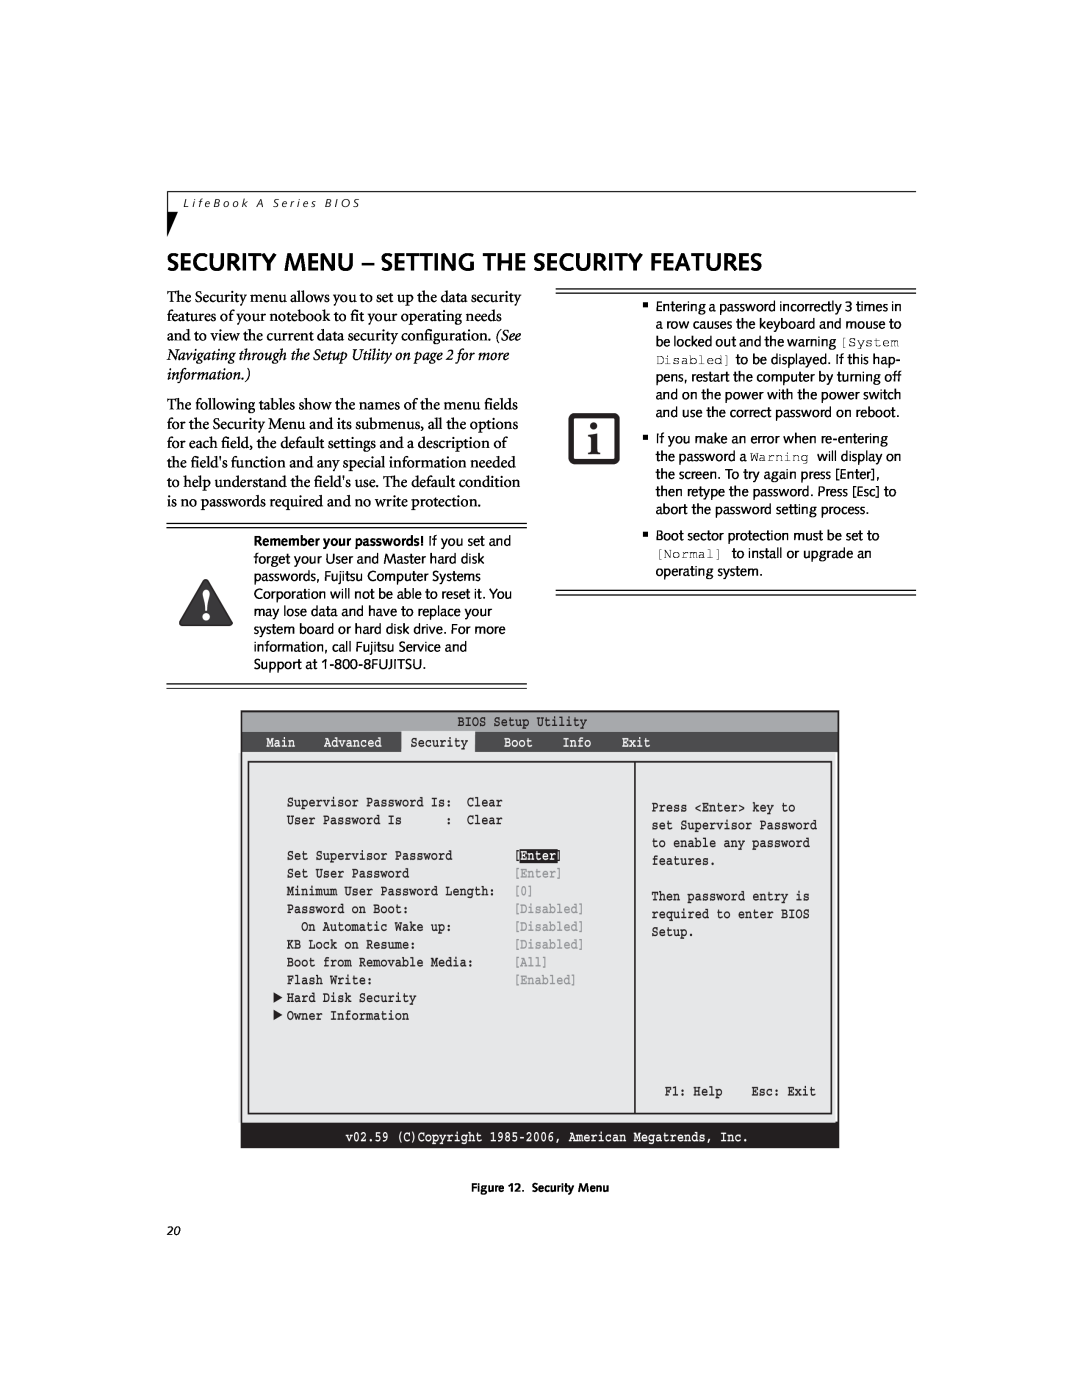 Fujitsu A3110 manual Security Menu - Setting The Security Features, Advanced, Boot, Exit, Enter, Disabled, Enabled 